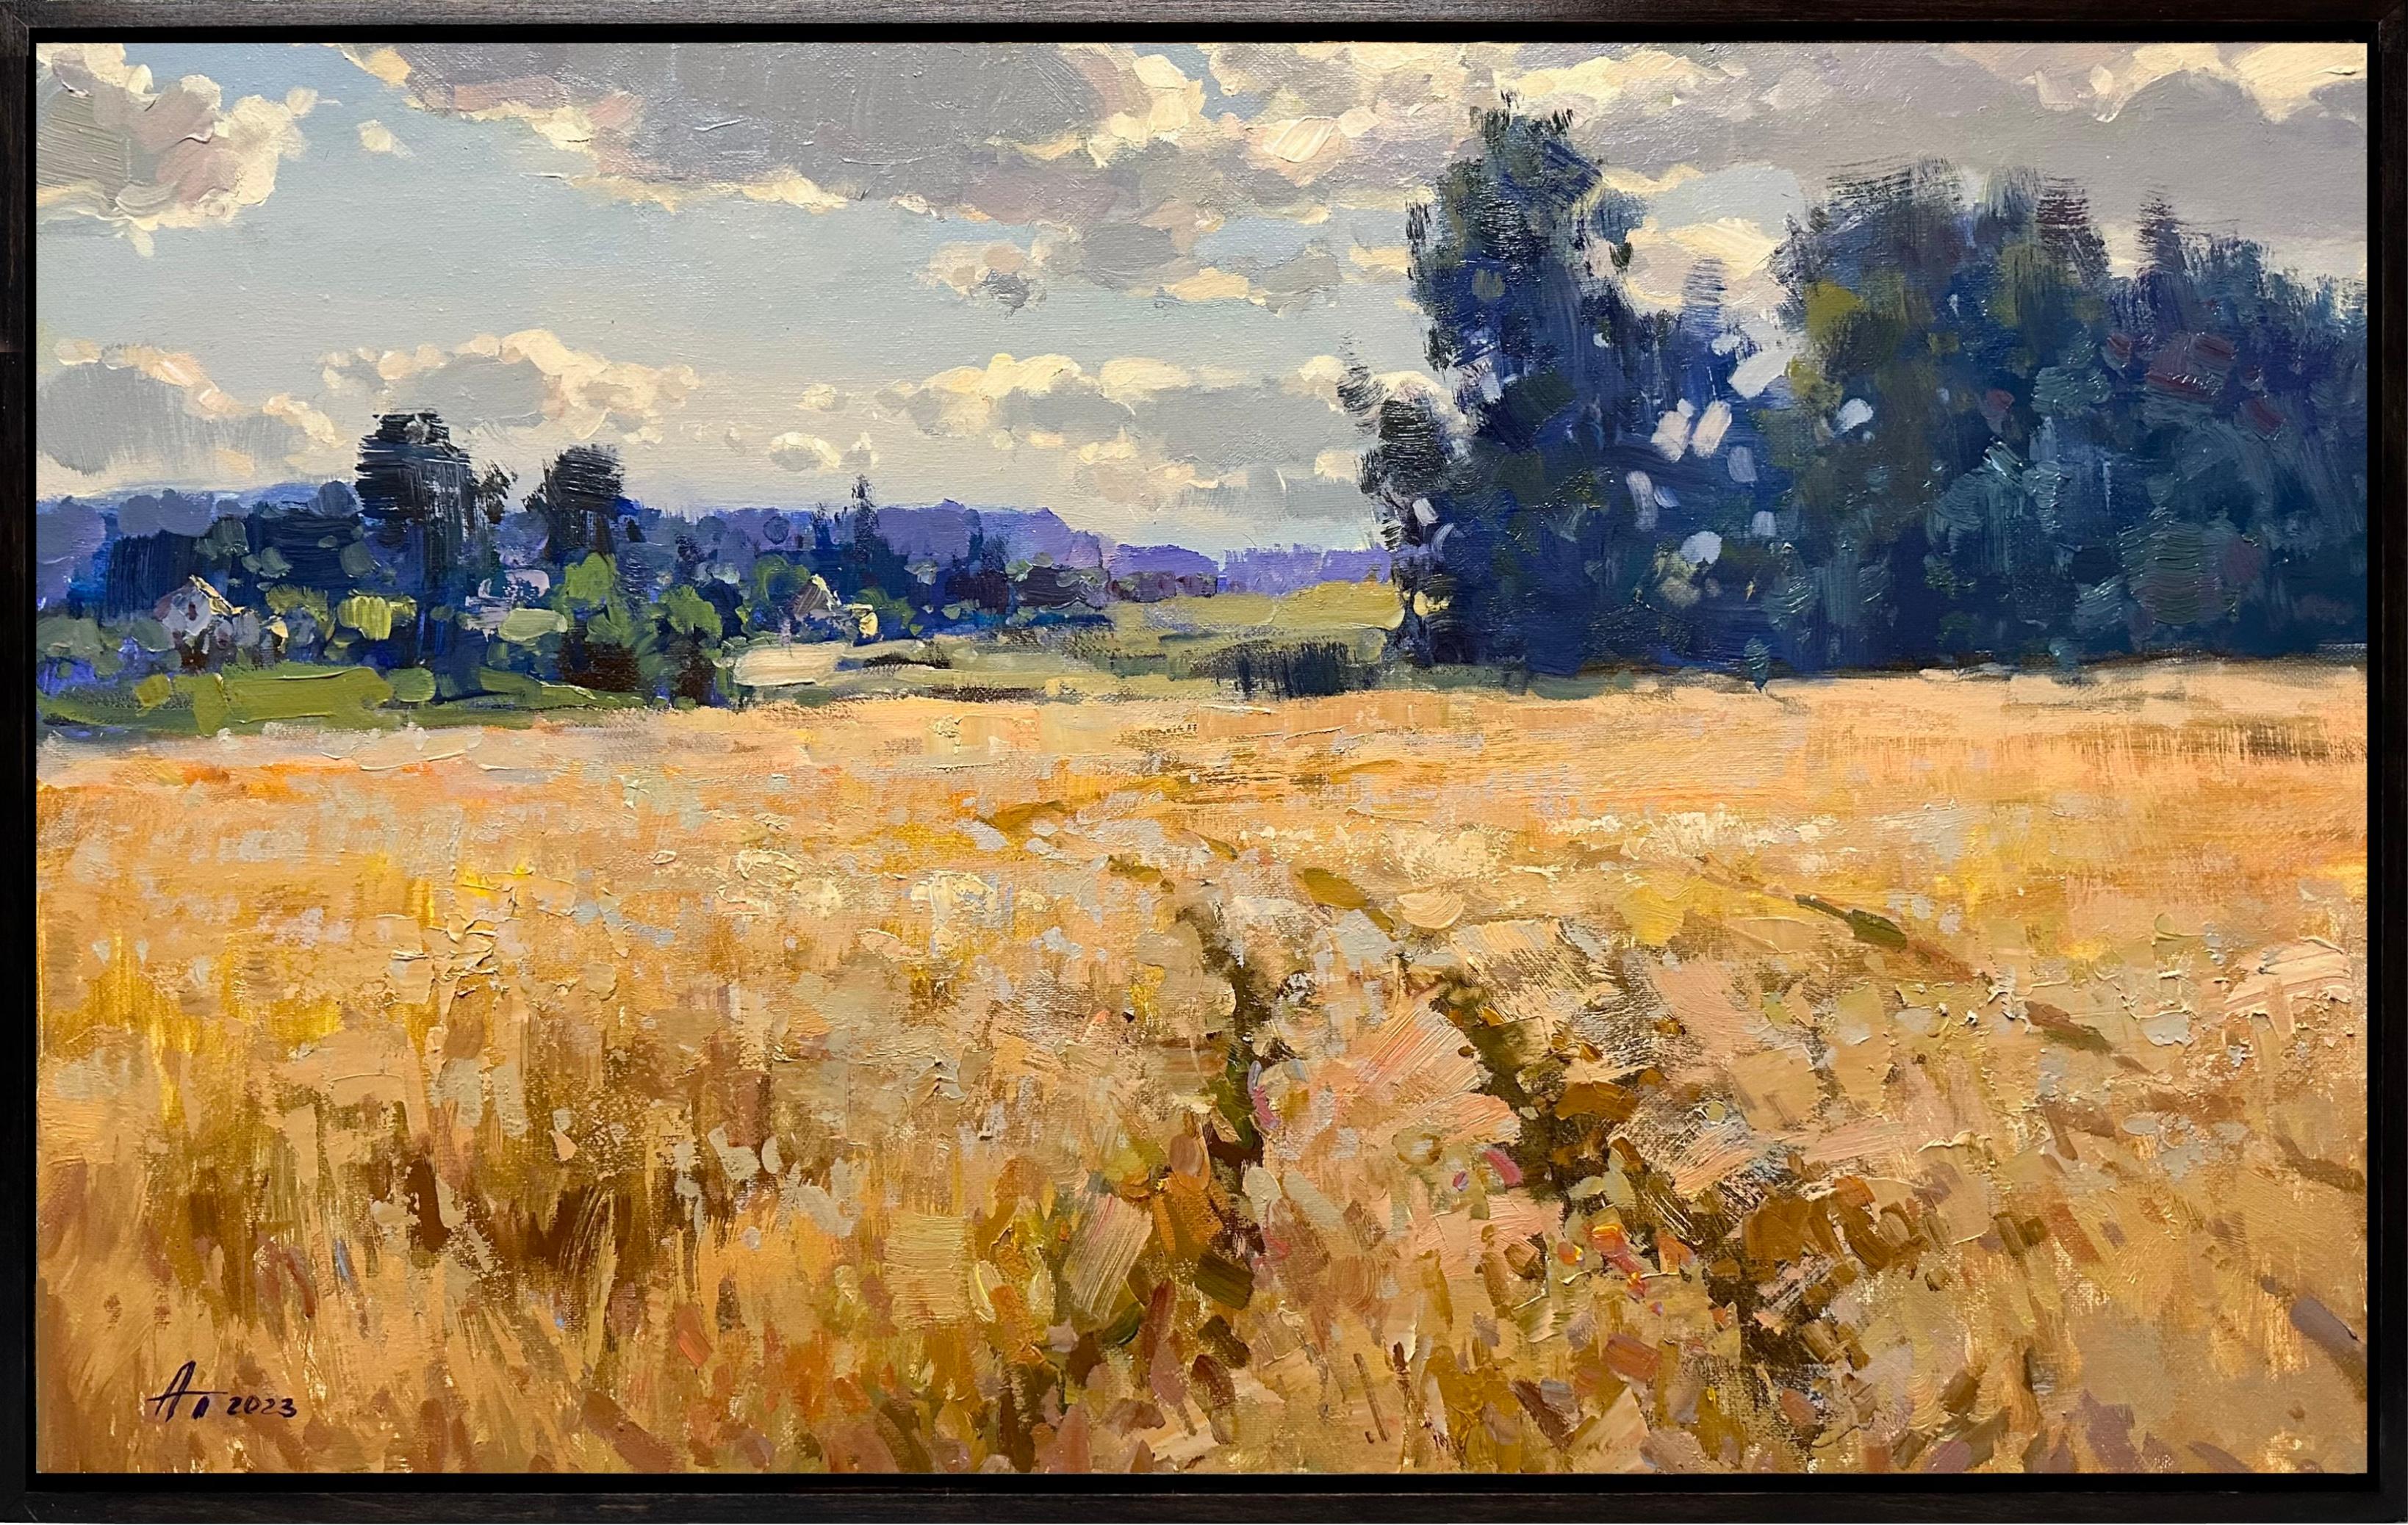 Rye Original Field Landscape Oil Painting by Andrei Belaichuk For Sale 4